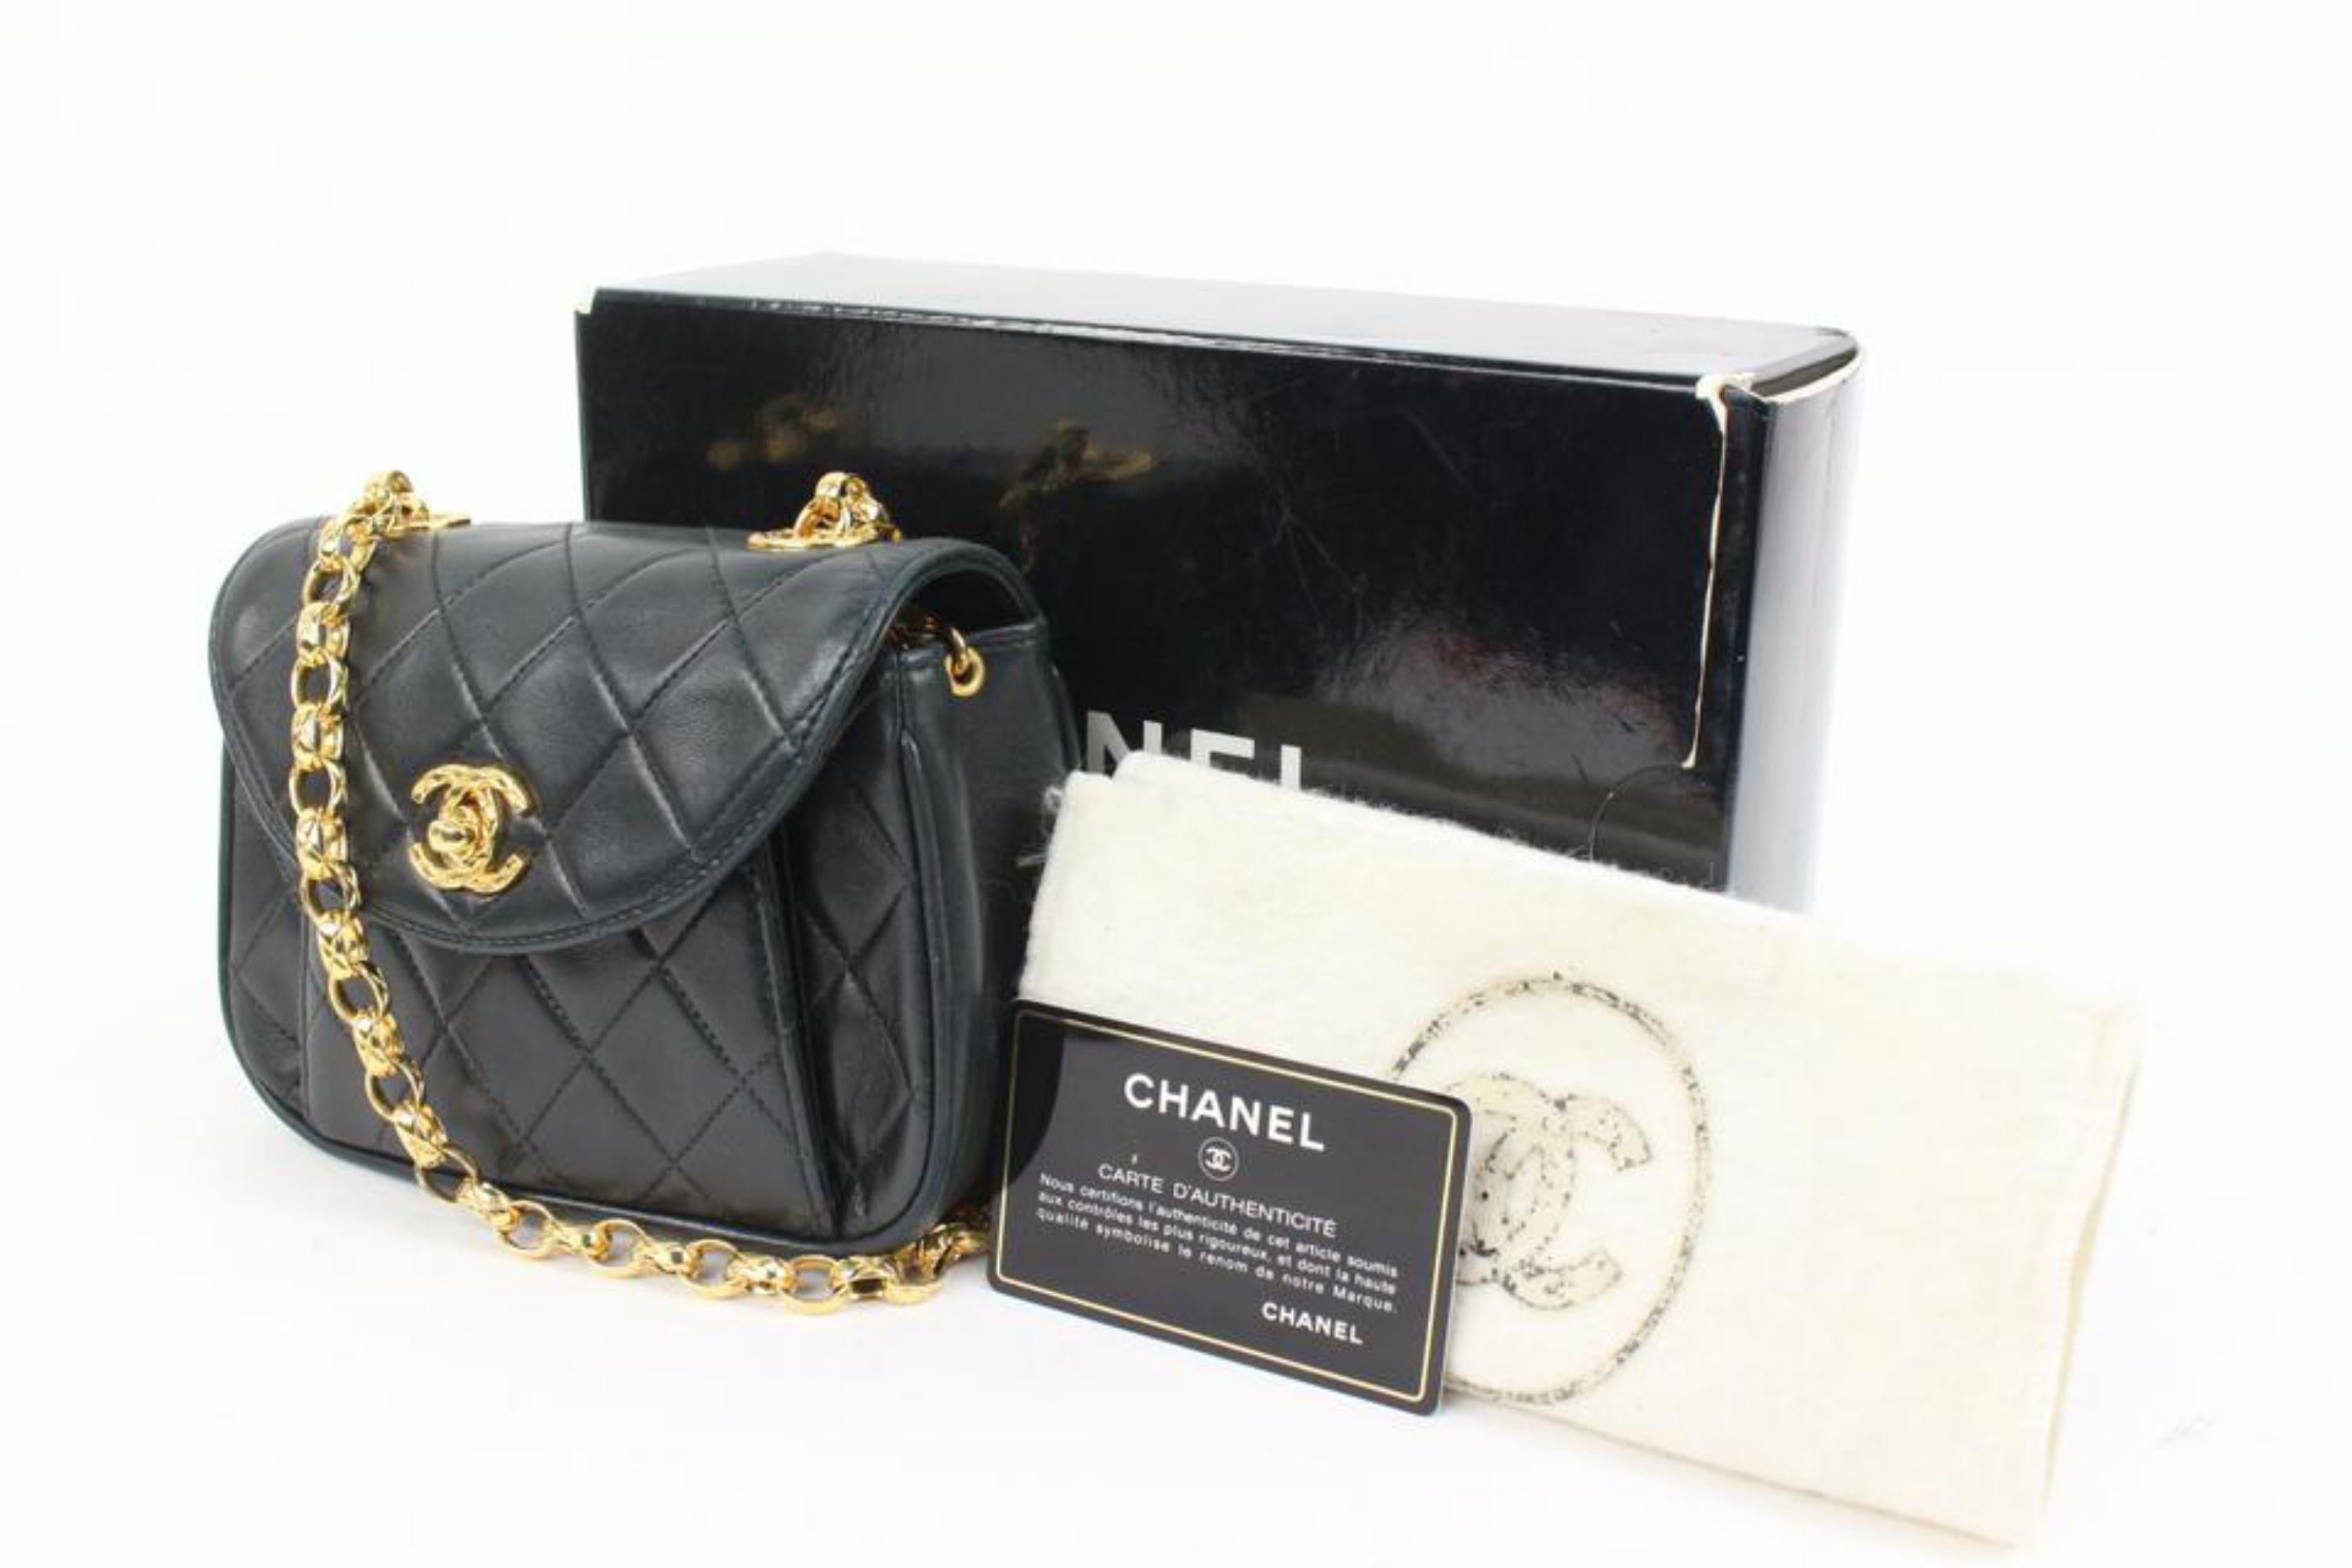 Chanel Black Lambskin Quilted Gold Hardware Round Flap s331ck50
Date Code/Serial Number: 2243512
Made In: France
Measurements: Length:  6.5